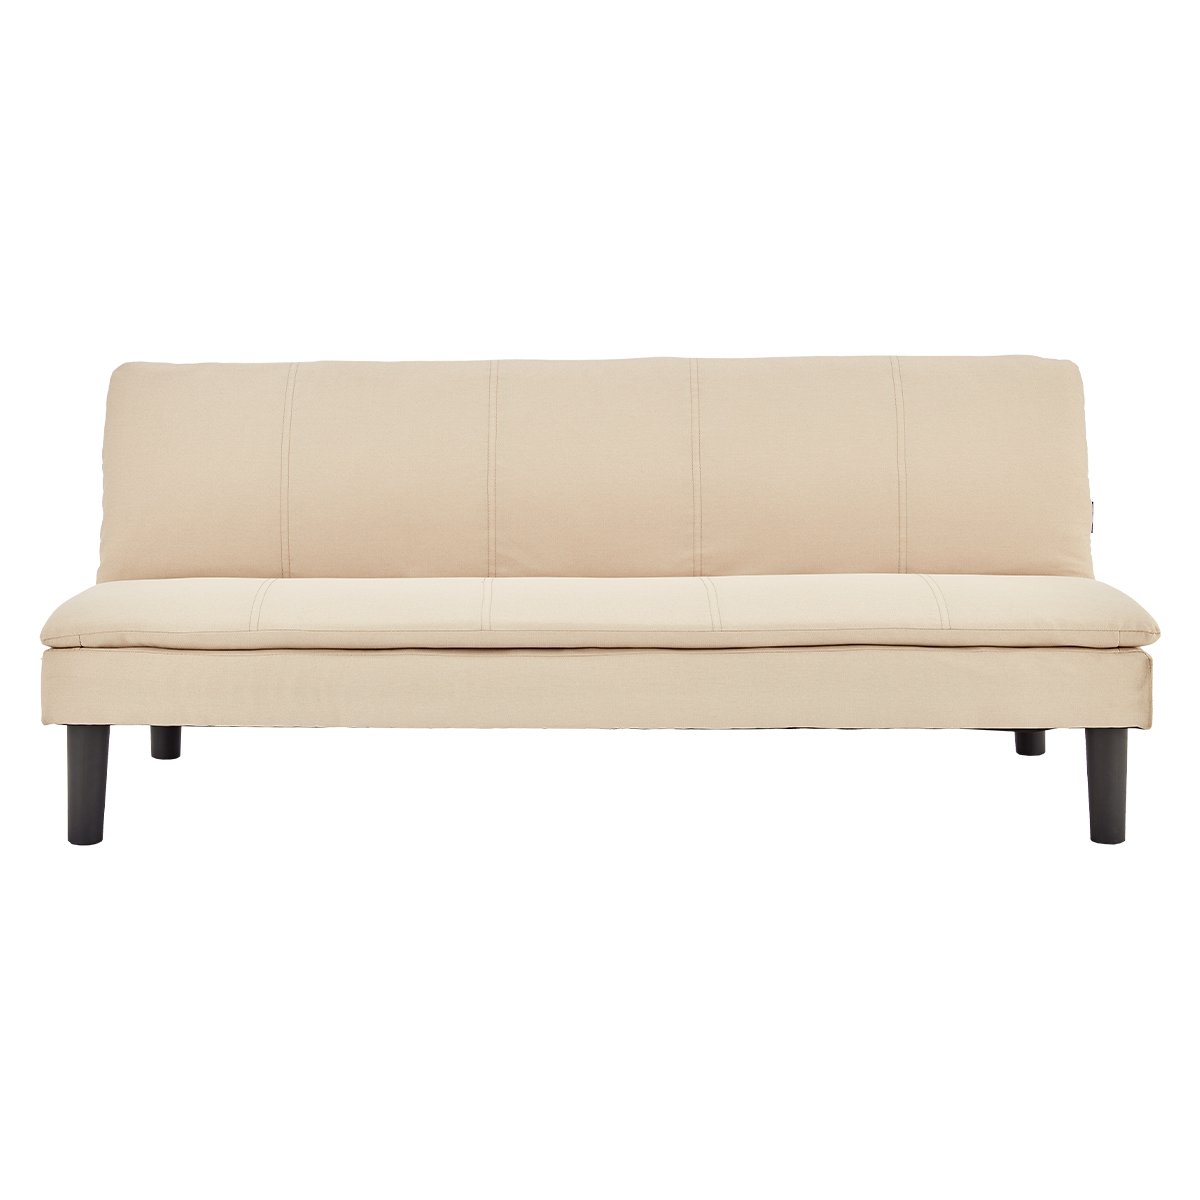 Sarantino 3 Seater Modular Faux Linen Fabric Sofa Bed Couch - Beige 1